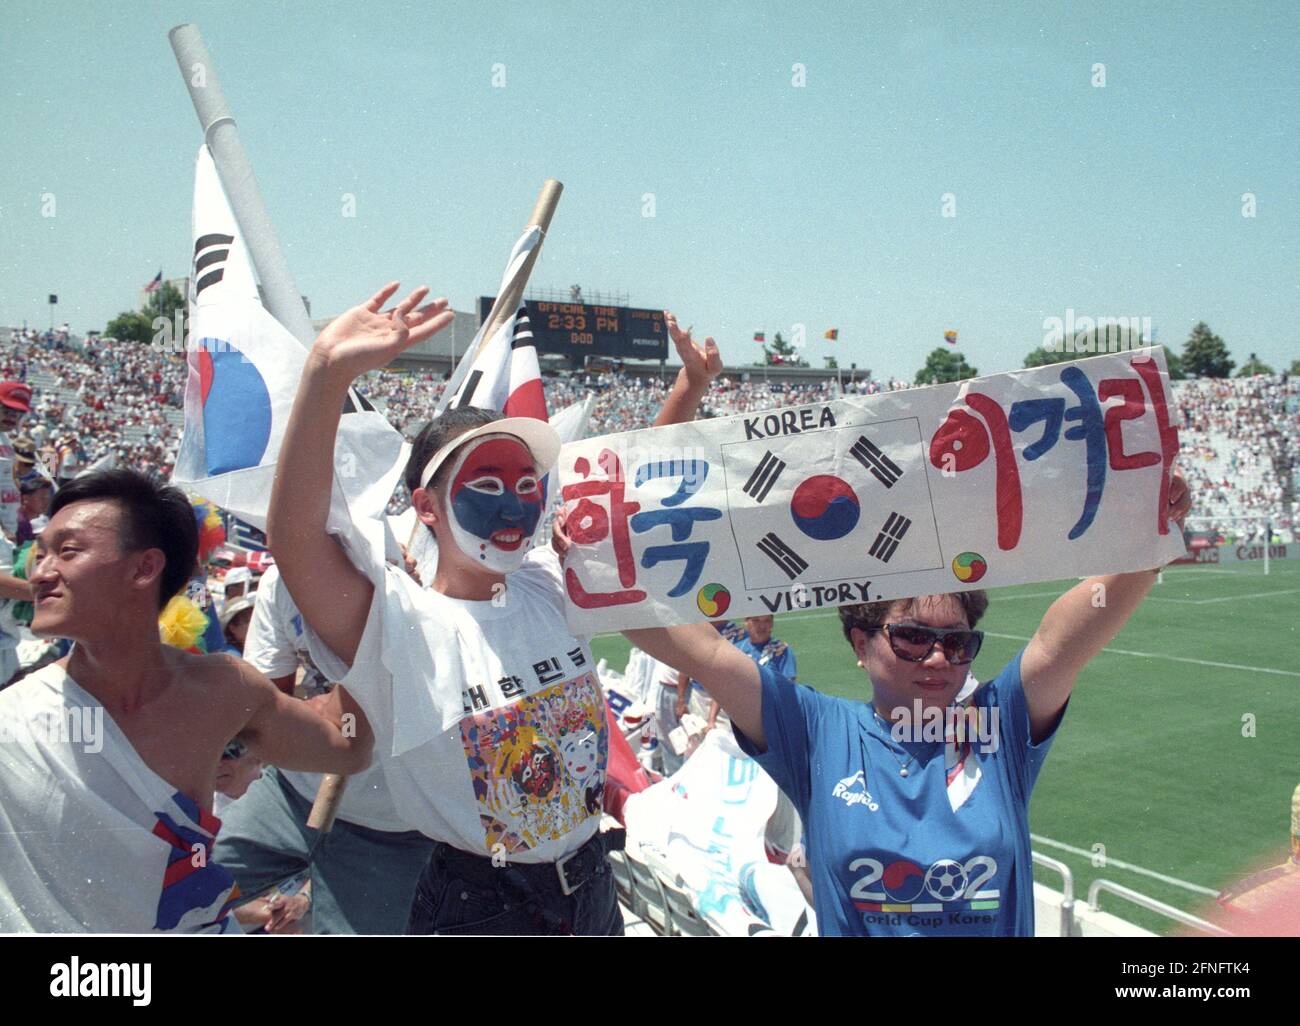 World Cup 94 Germany - South Korea 3:2/27.06.1994 in Dallas. Korean fans in the Dallas stadium. [automated translation] Stock Photo